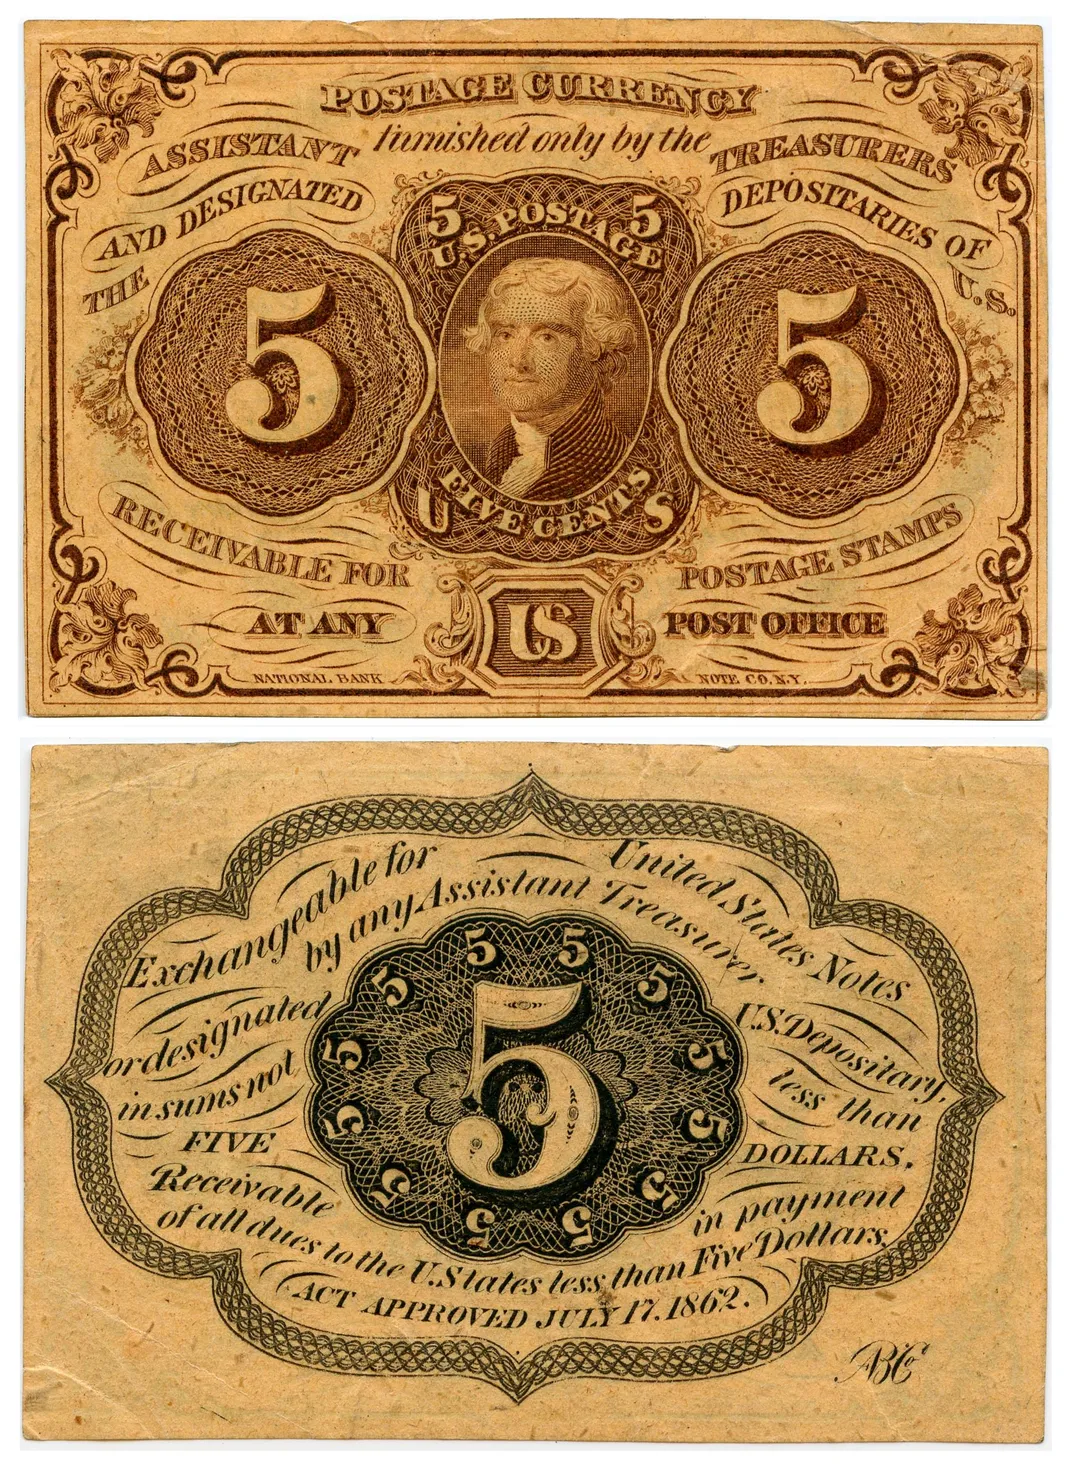 Fractional Currency